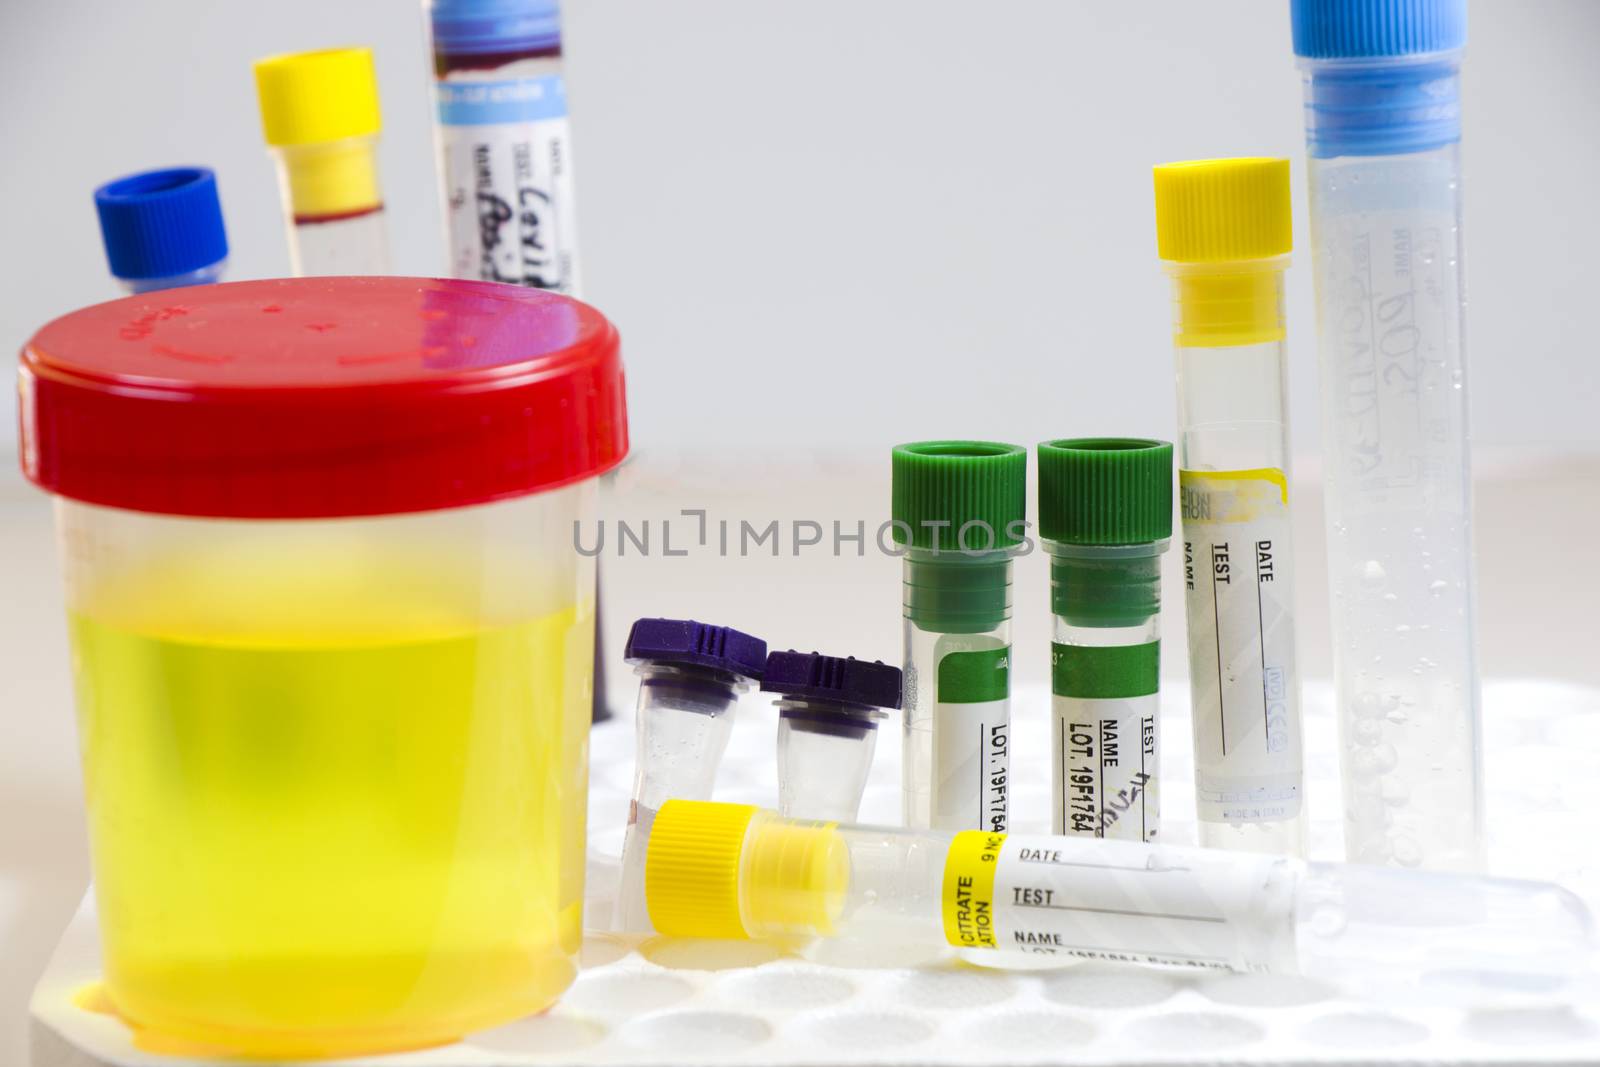 Drug test, medical urine and pee test with blood and other tubes on the white background, colorful lab test containers by Taidundua